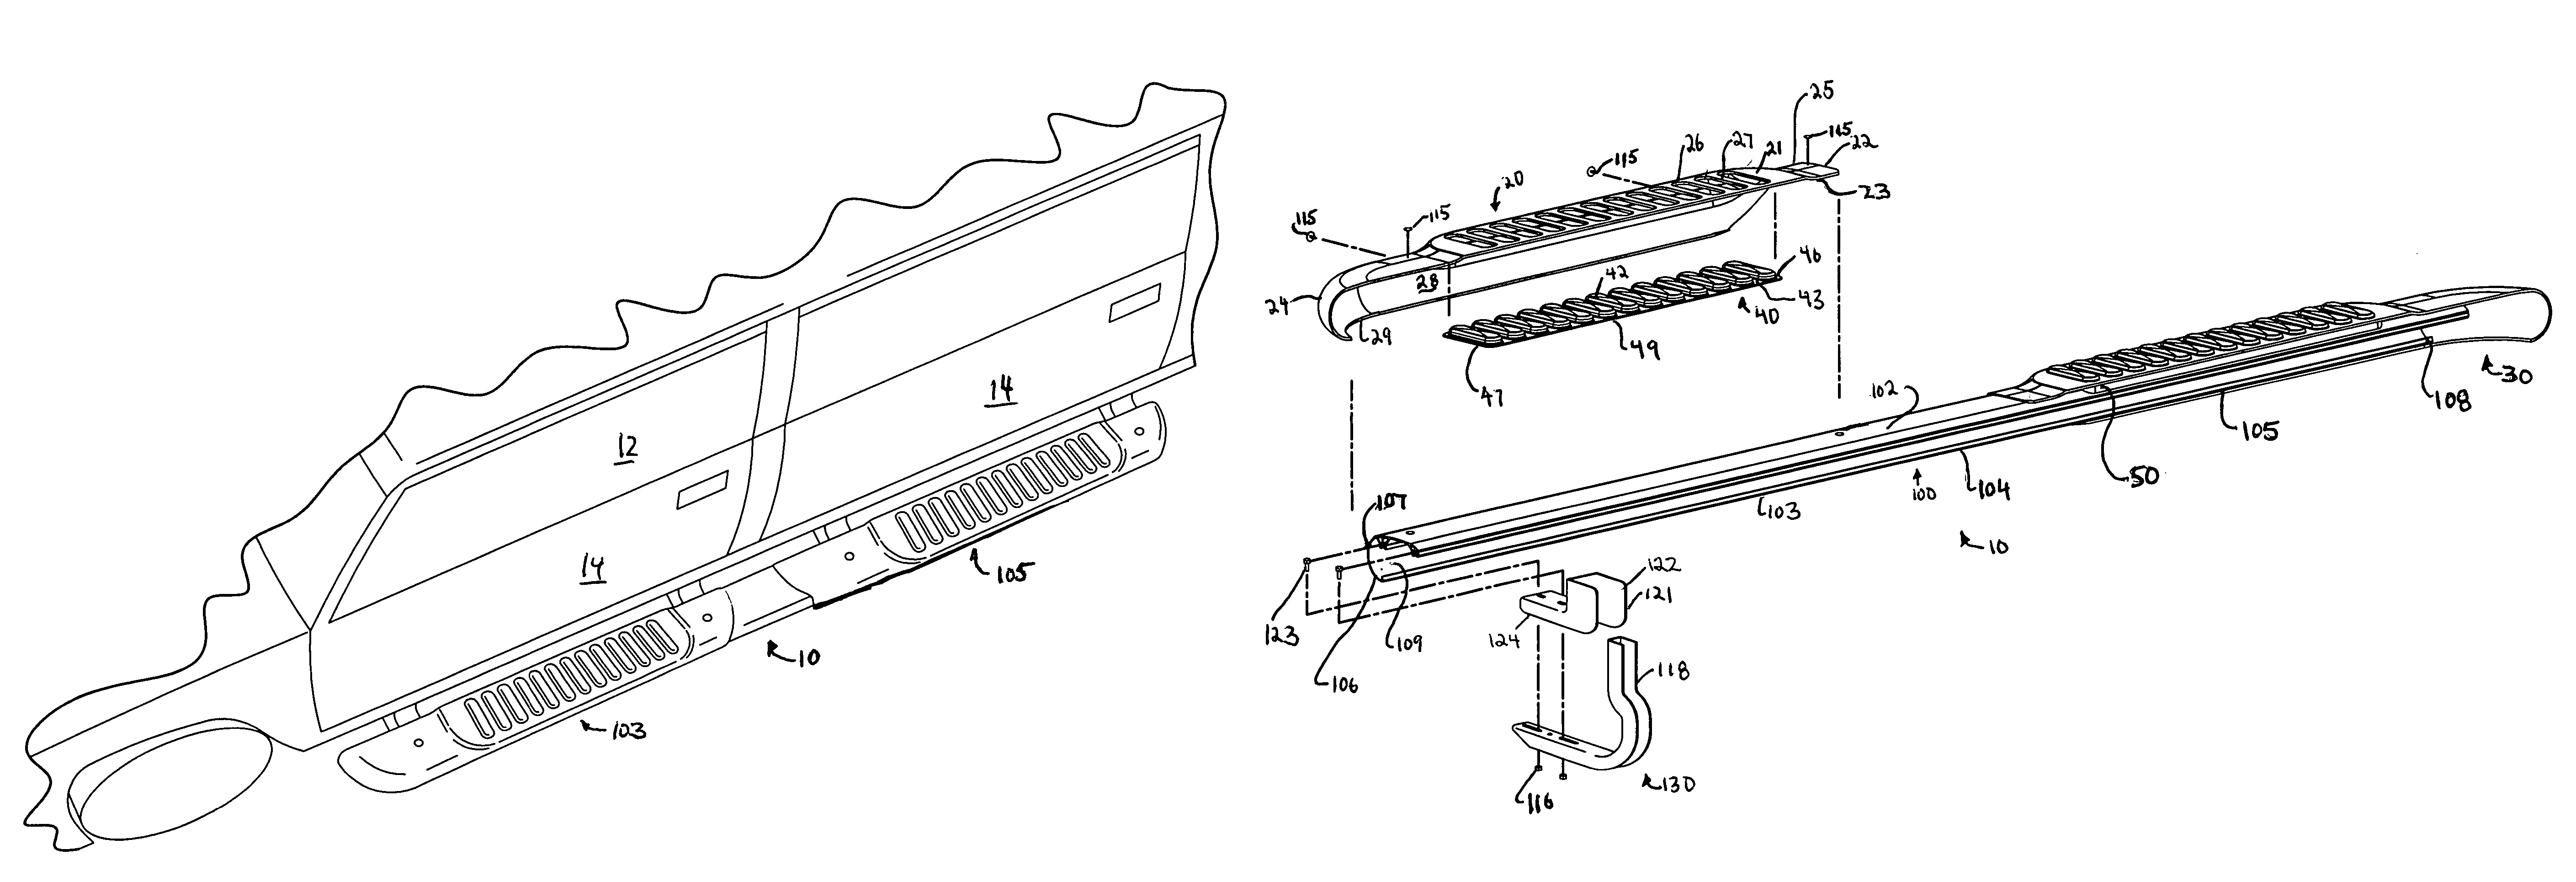 Running board, motor vehicle including a running board, and a method for installing a running board to a motor vehicle